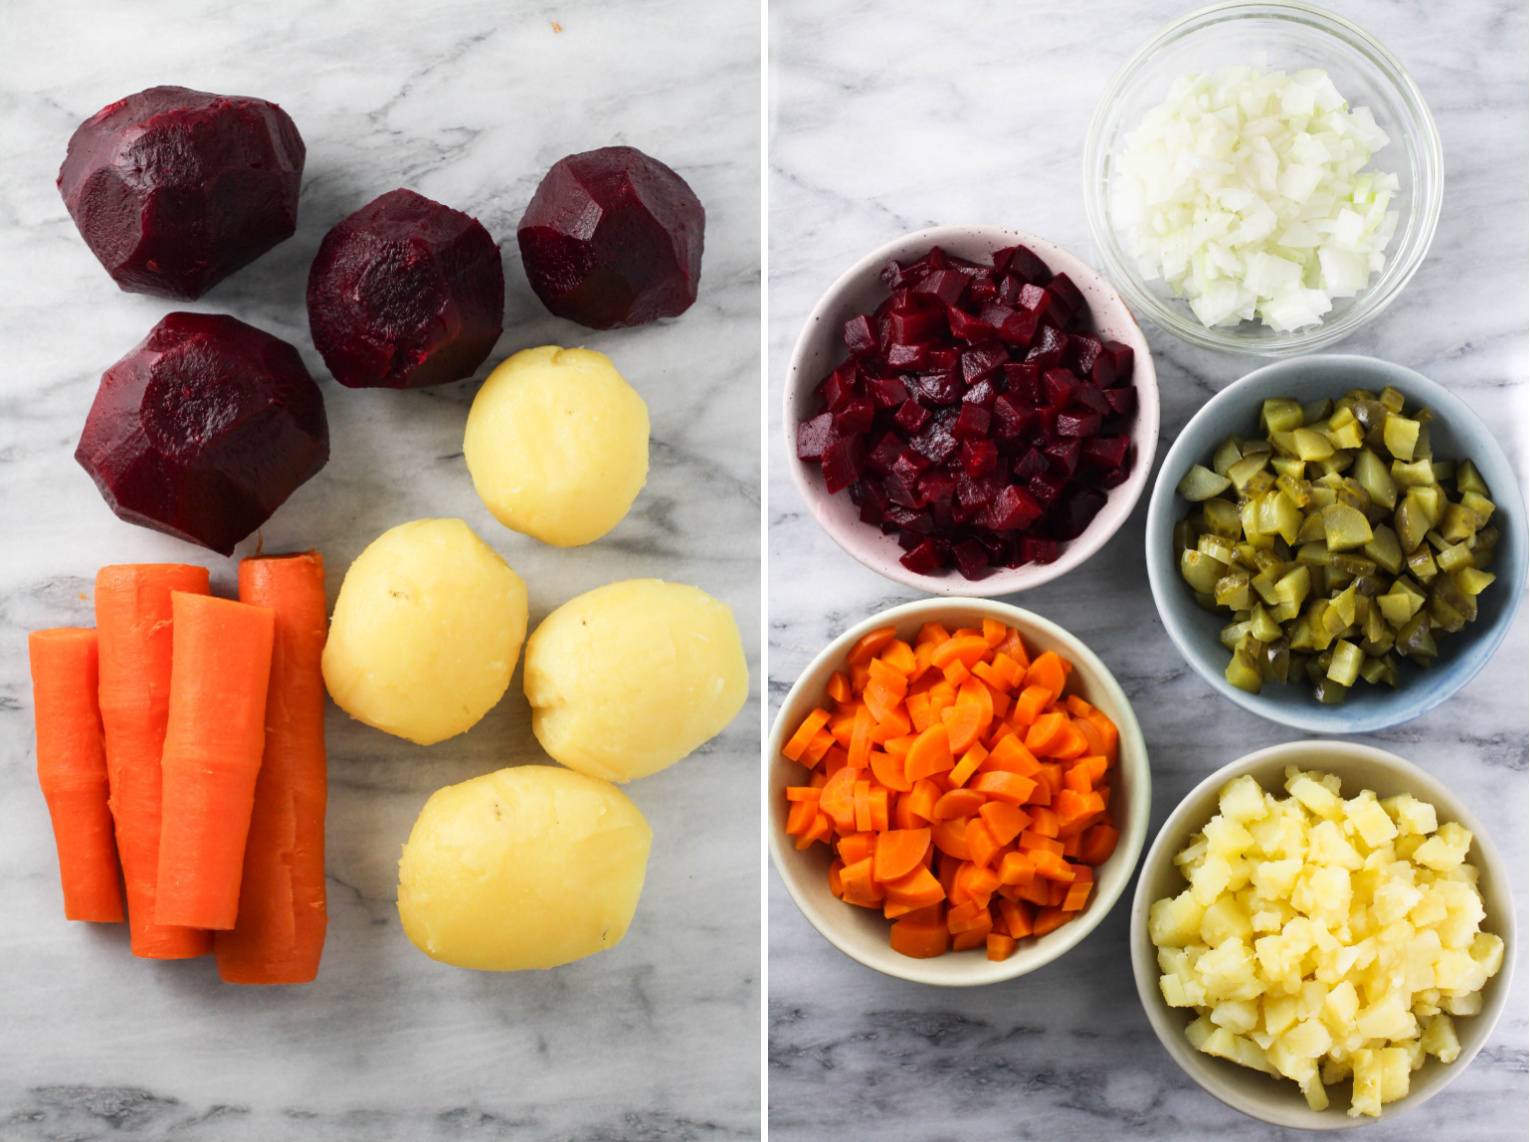 Two side-by-side images. On the left image, cooked and peeled beets, potatoes, and carrots. On the right, diced beets, potatoes, carrots, pickles, and onions, in small bowls.